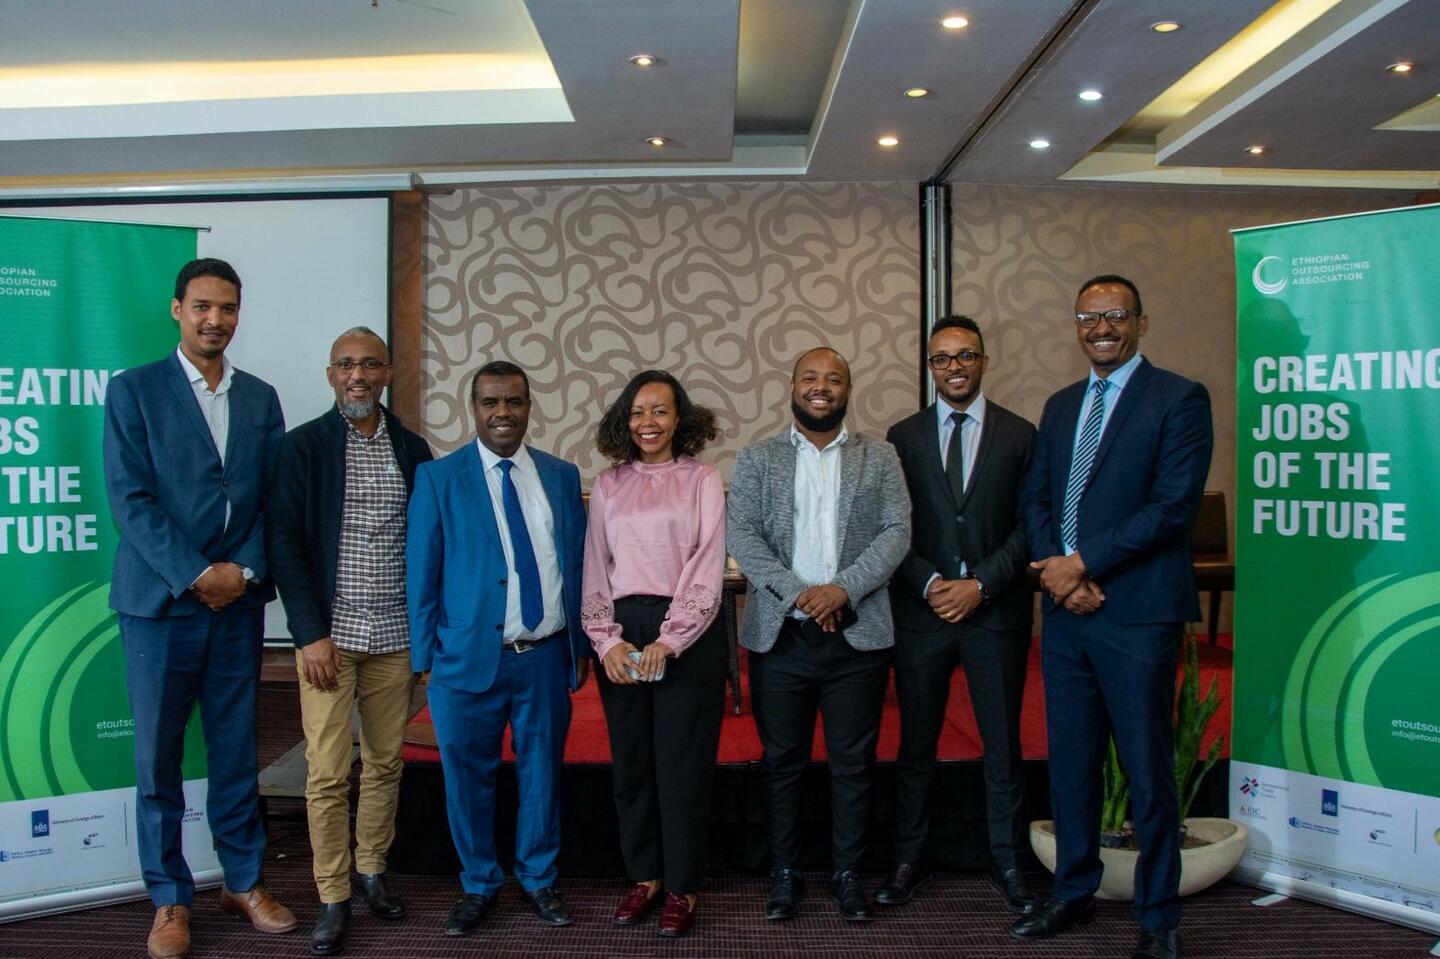 Ethiopian officials pose for photo